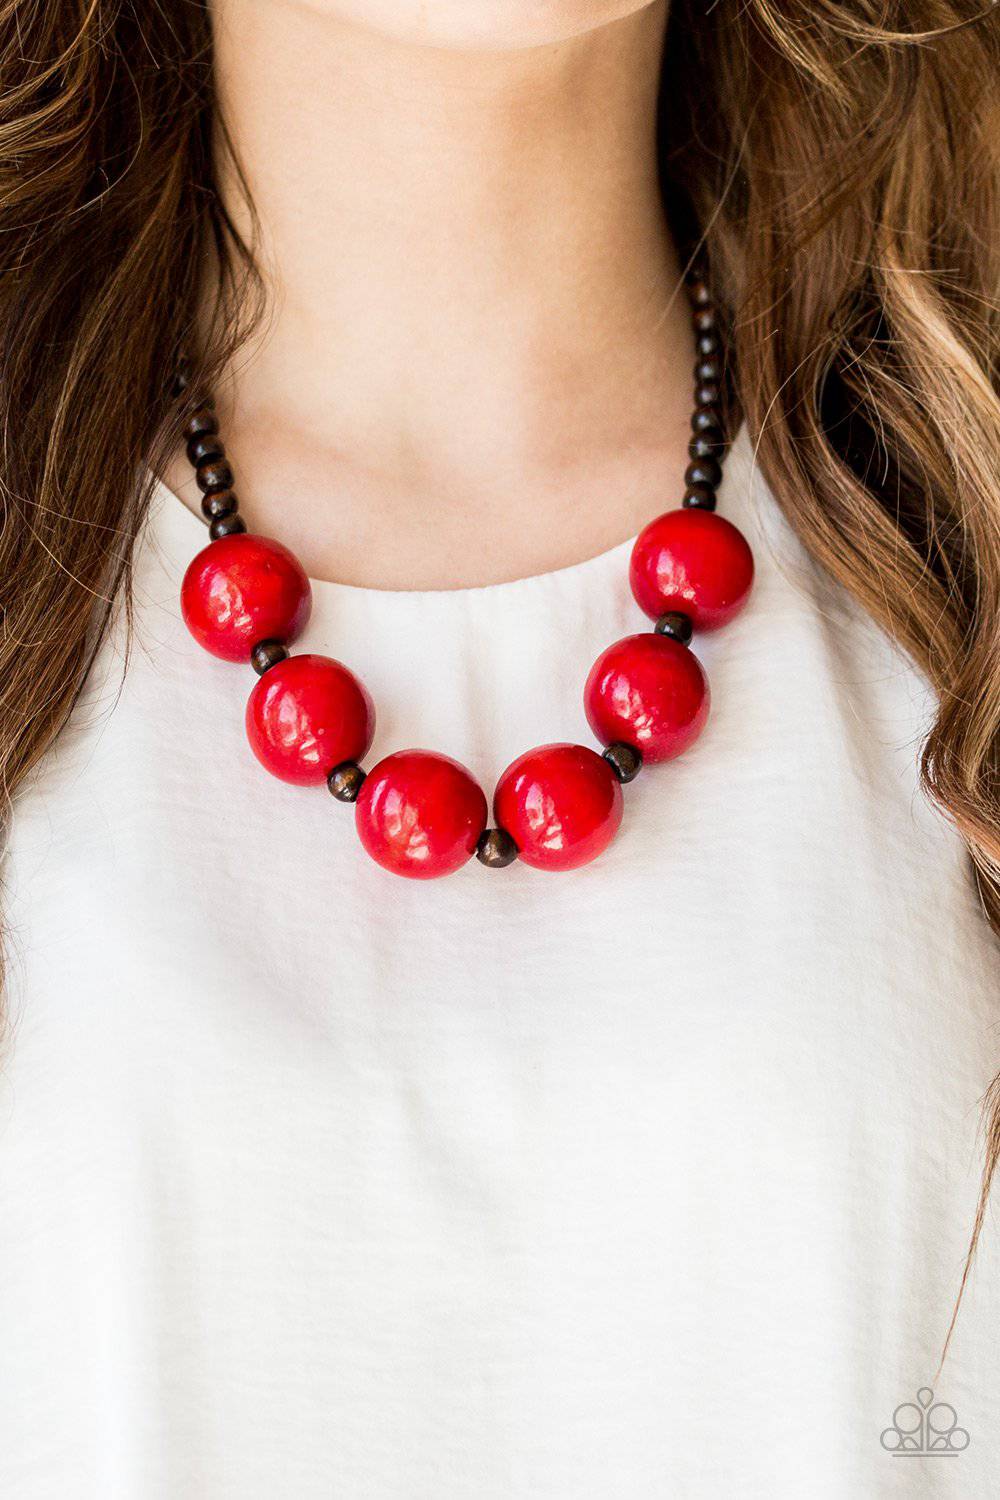 Oh My Miami - Red & Brown Wooden Bead Necklace - Paparazzi Accessories - GlaMarous Titi Jewels